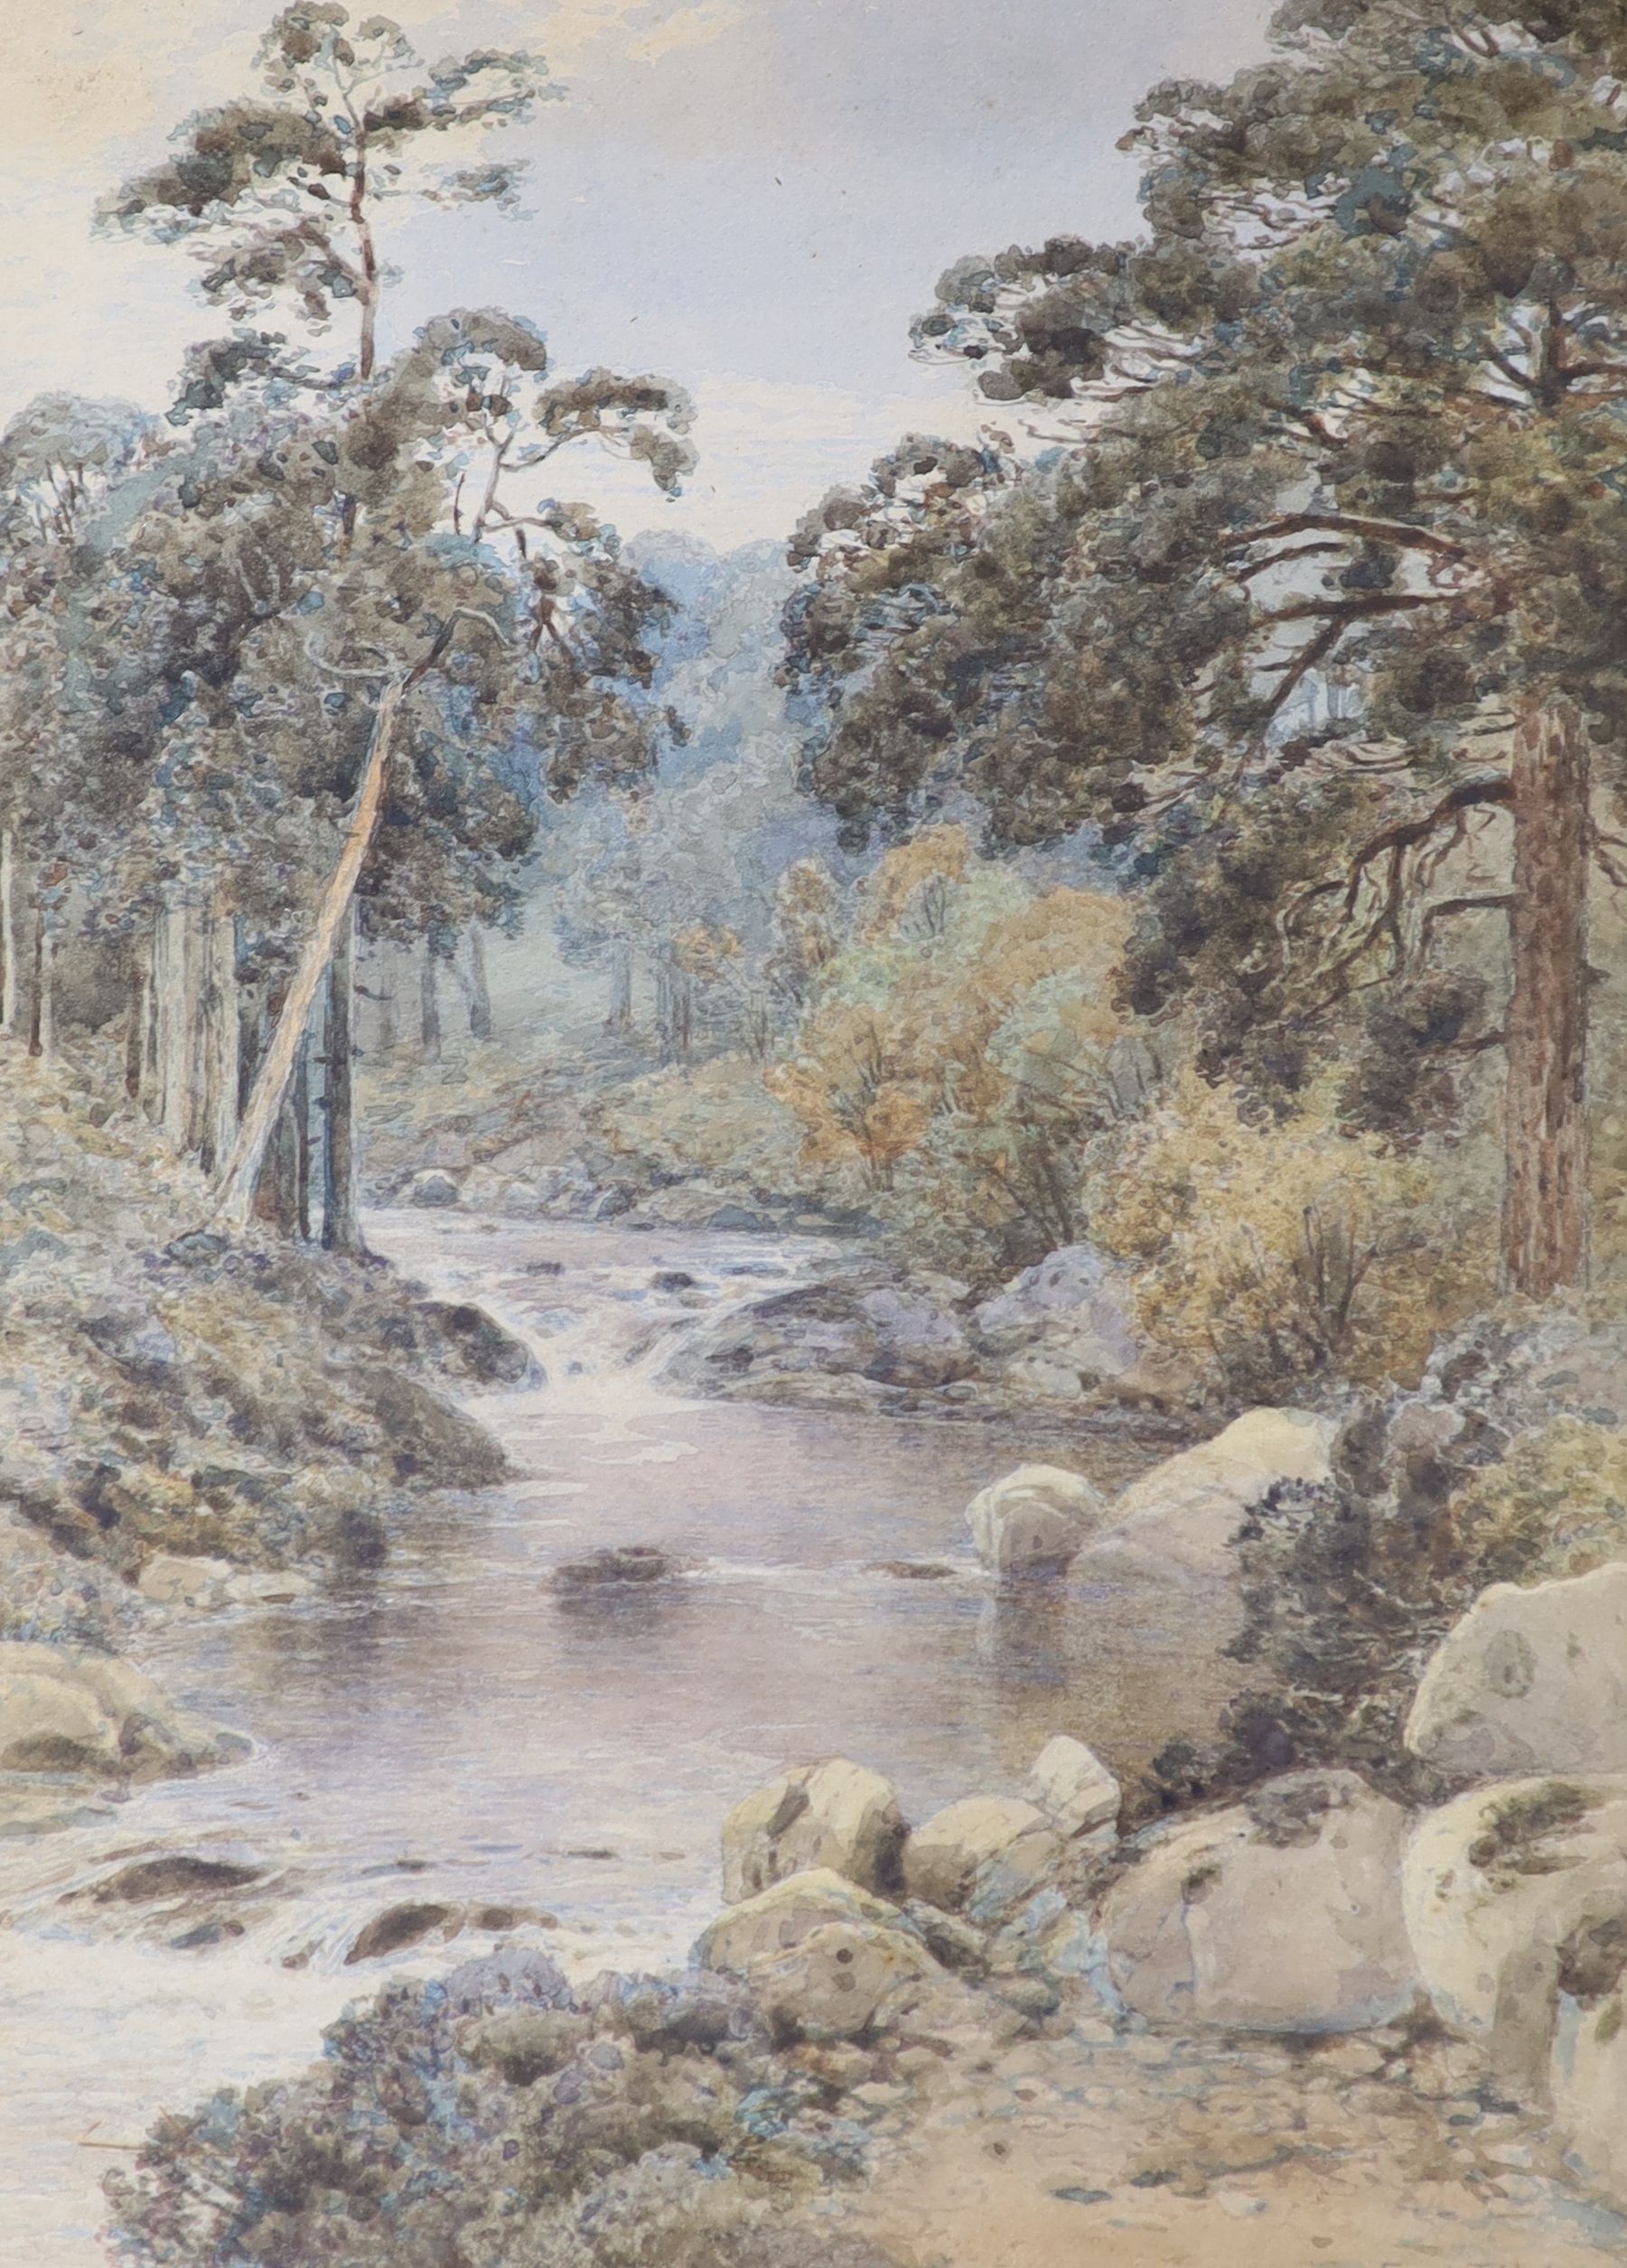 Frederick Tucker (1860-1935), two watercolours, The Castle Road, Edinburgh and a river landscape, both signed, one with artist label verso, 24 x 35cm and 36 x 26cm